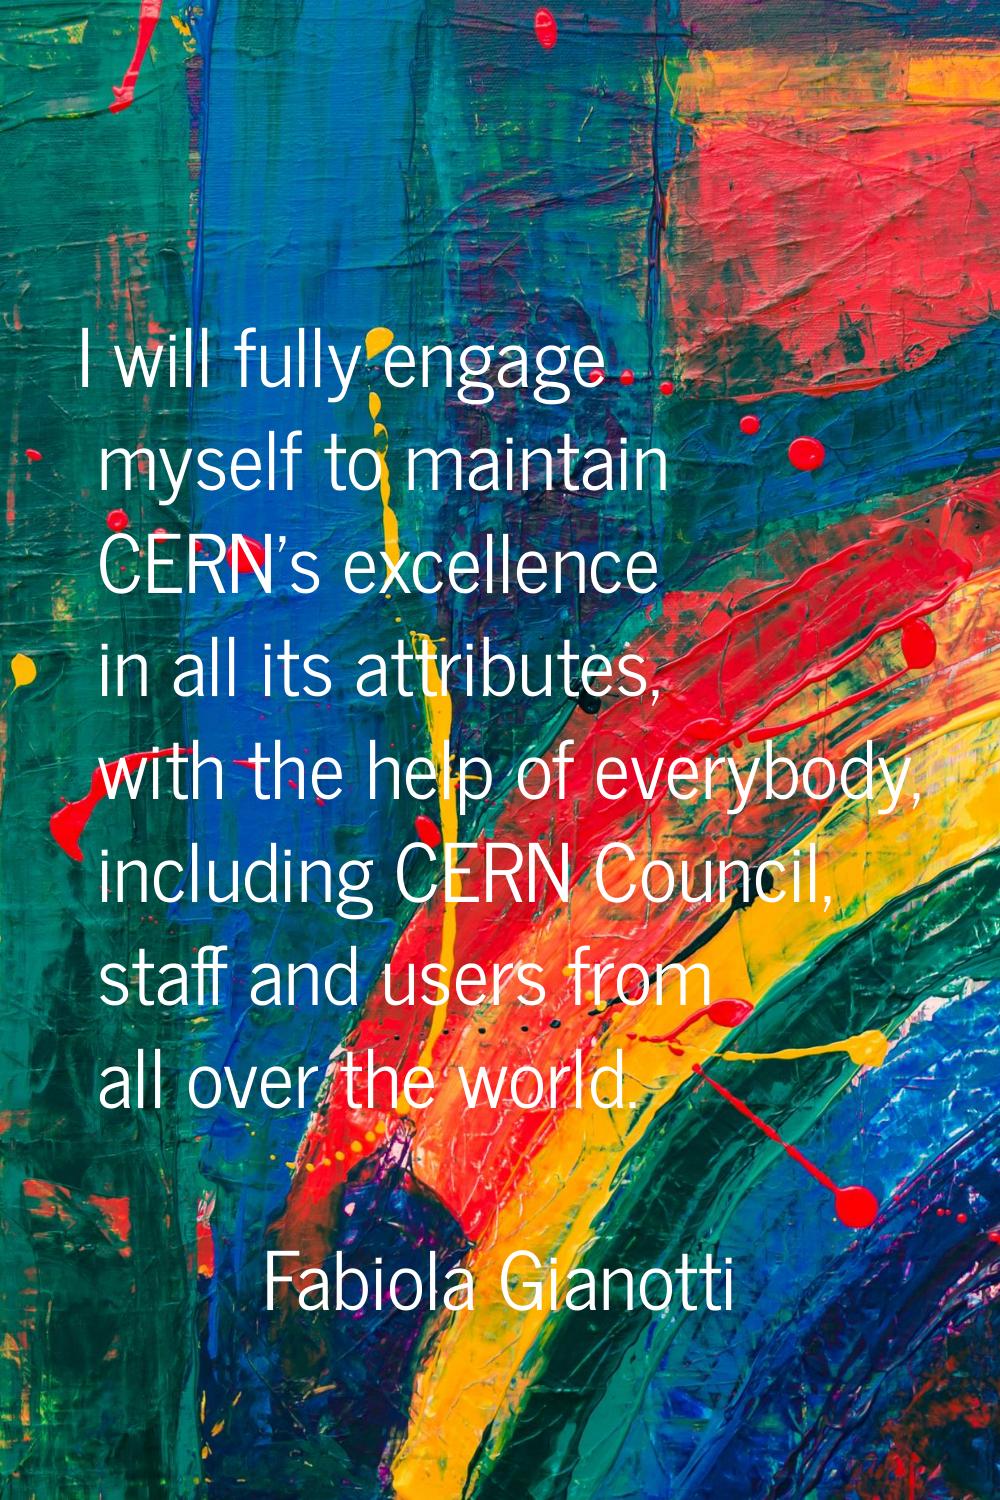 I will fully engage myself to maintain CERN's excellence in all its attributes, with the help of ev